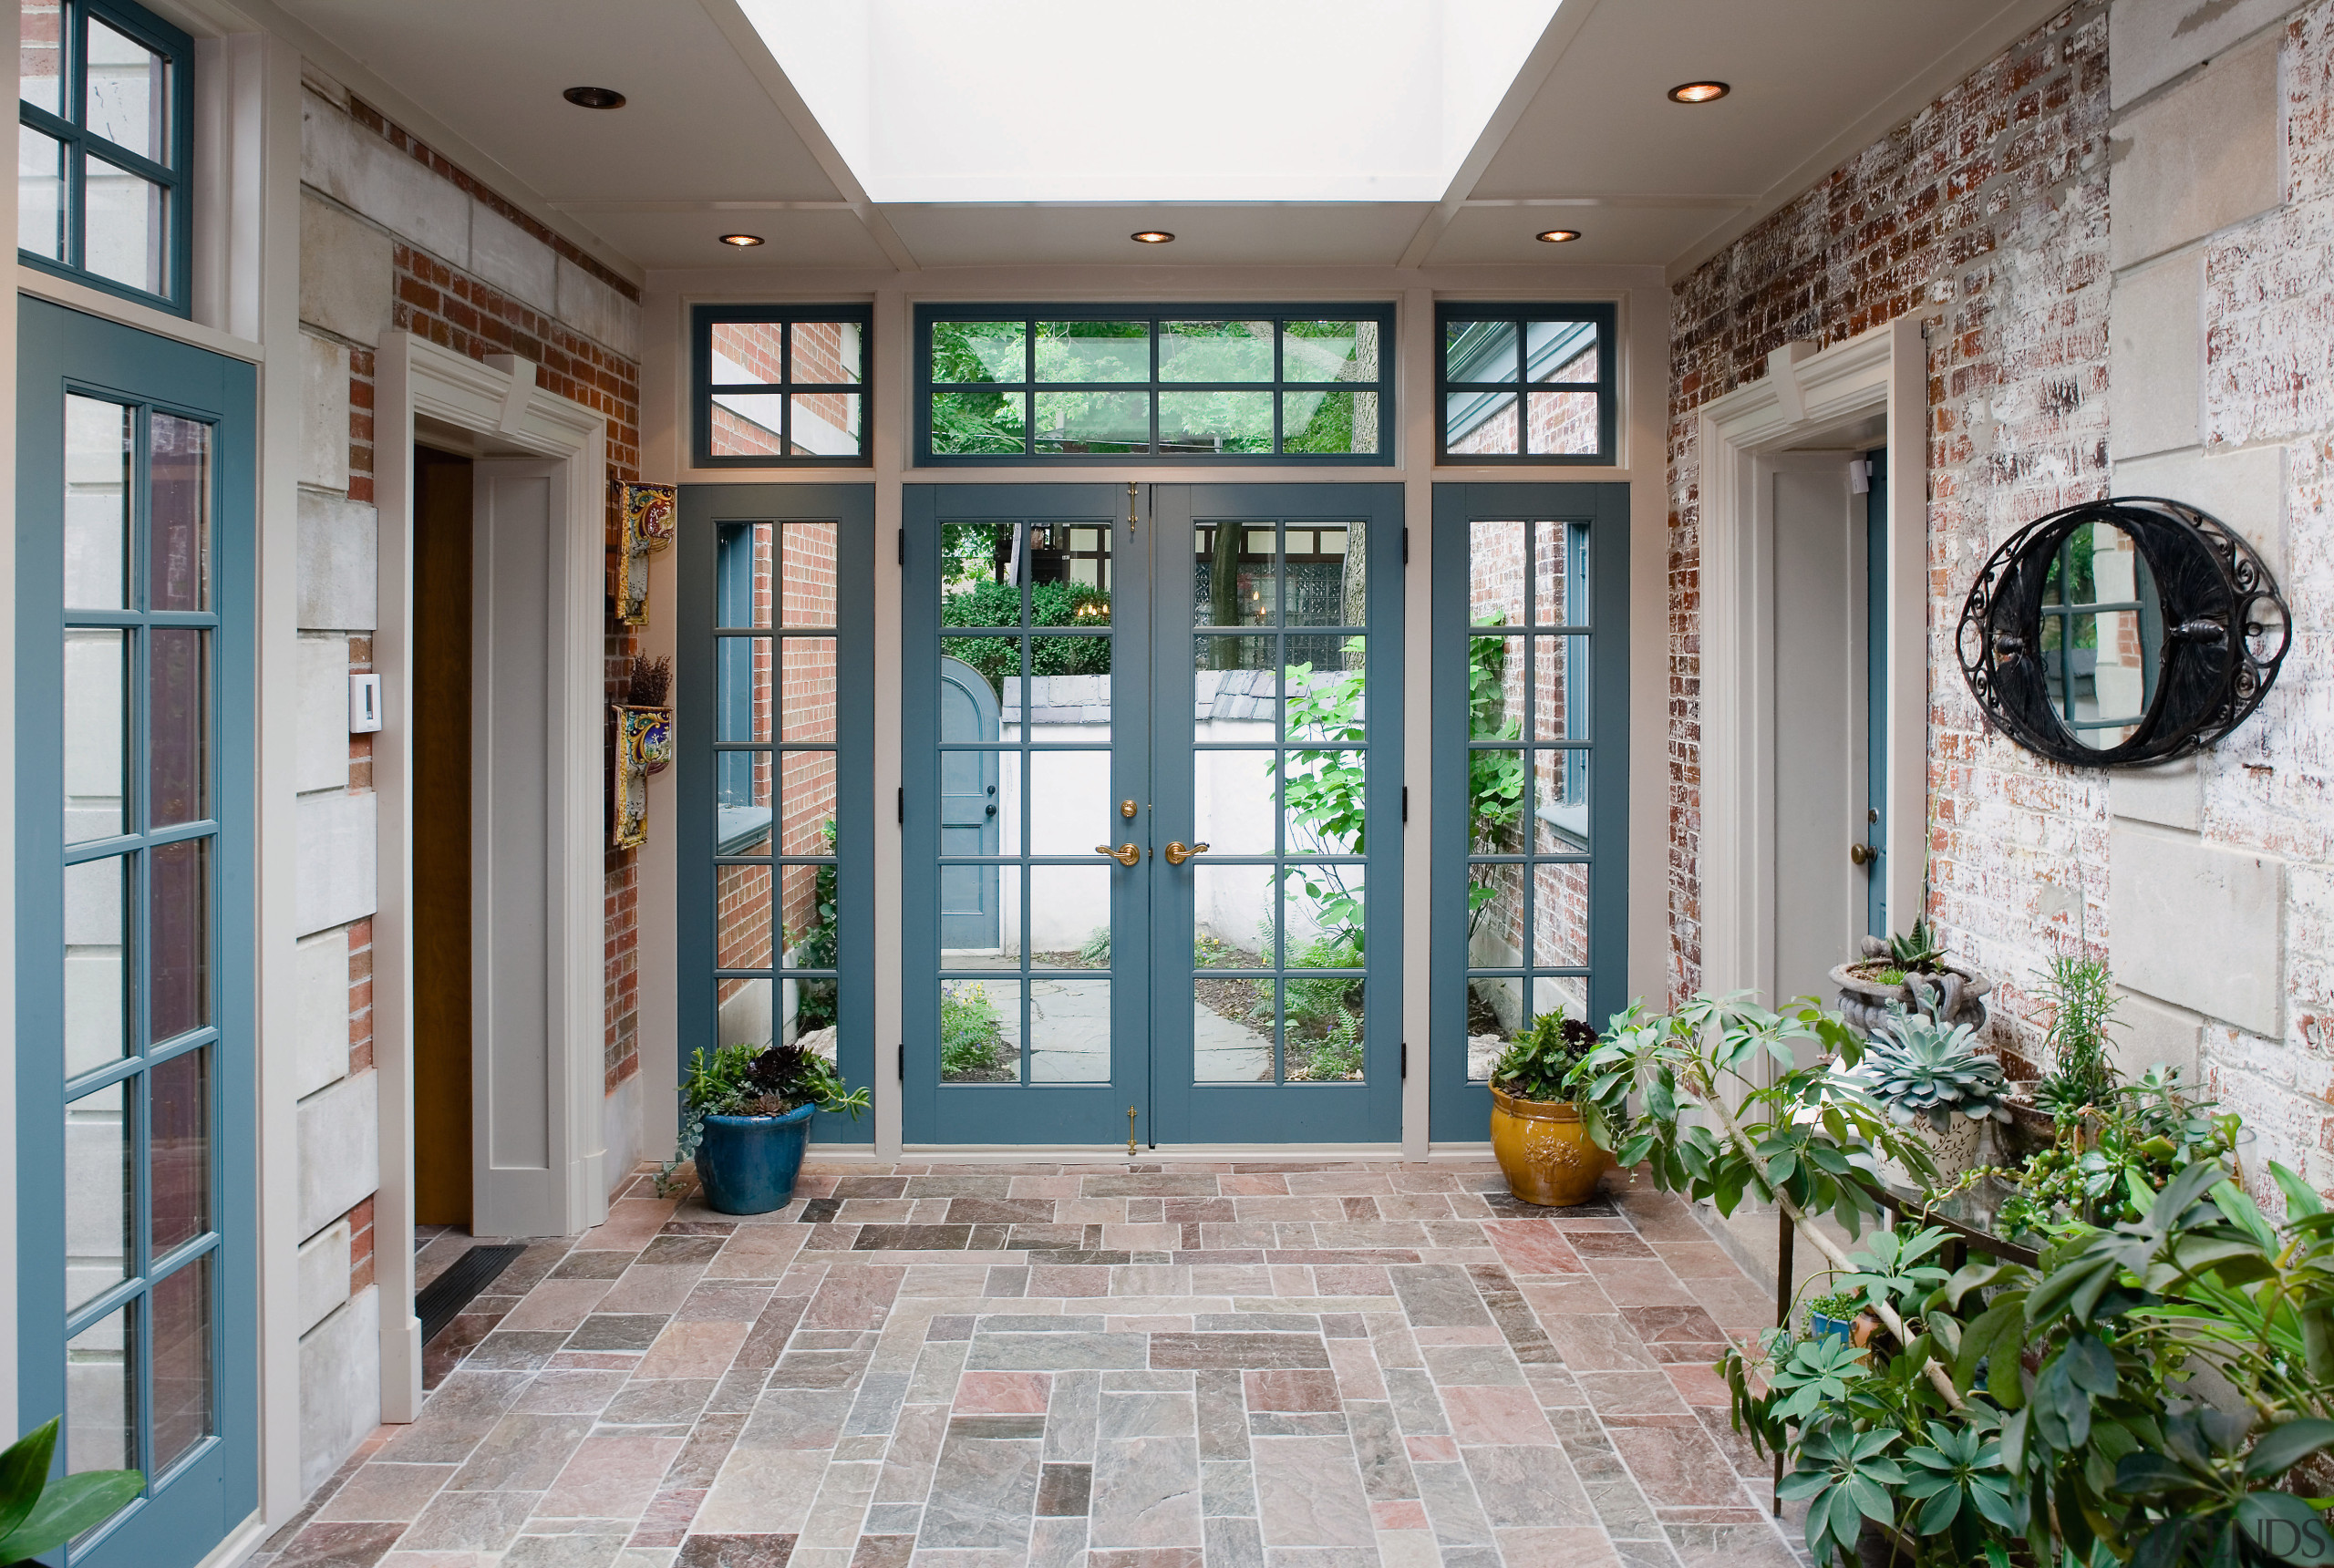 A view of the conservatory. - A view courtyard, door, estate, home, real estate, window, gray